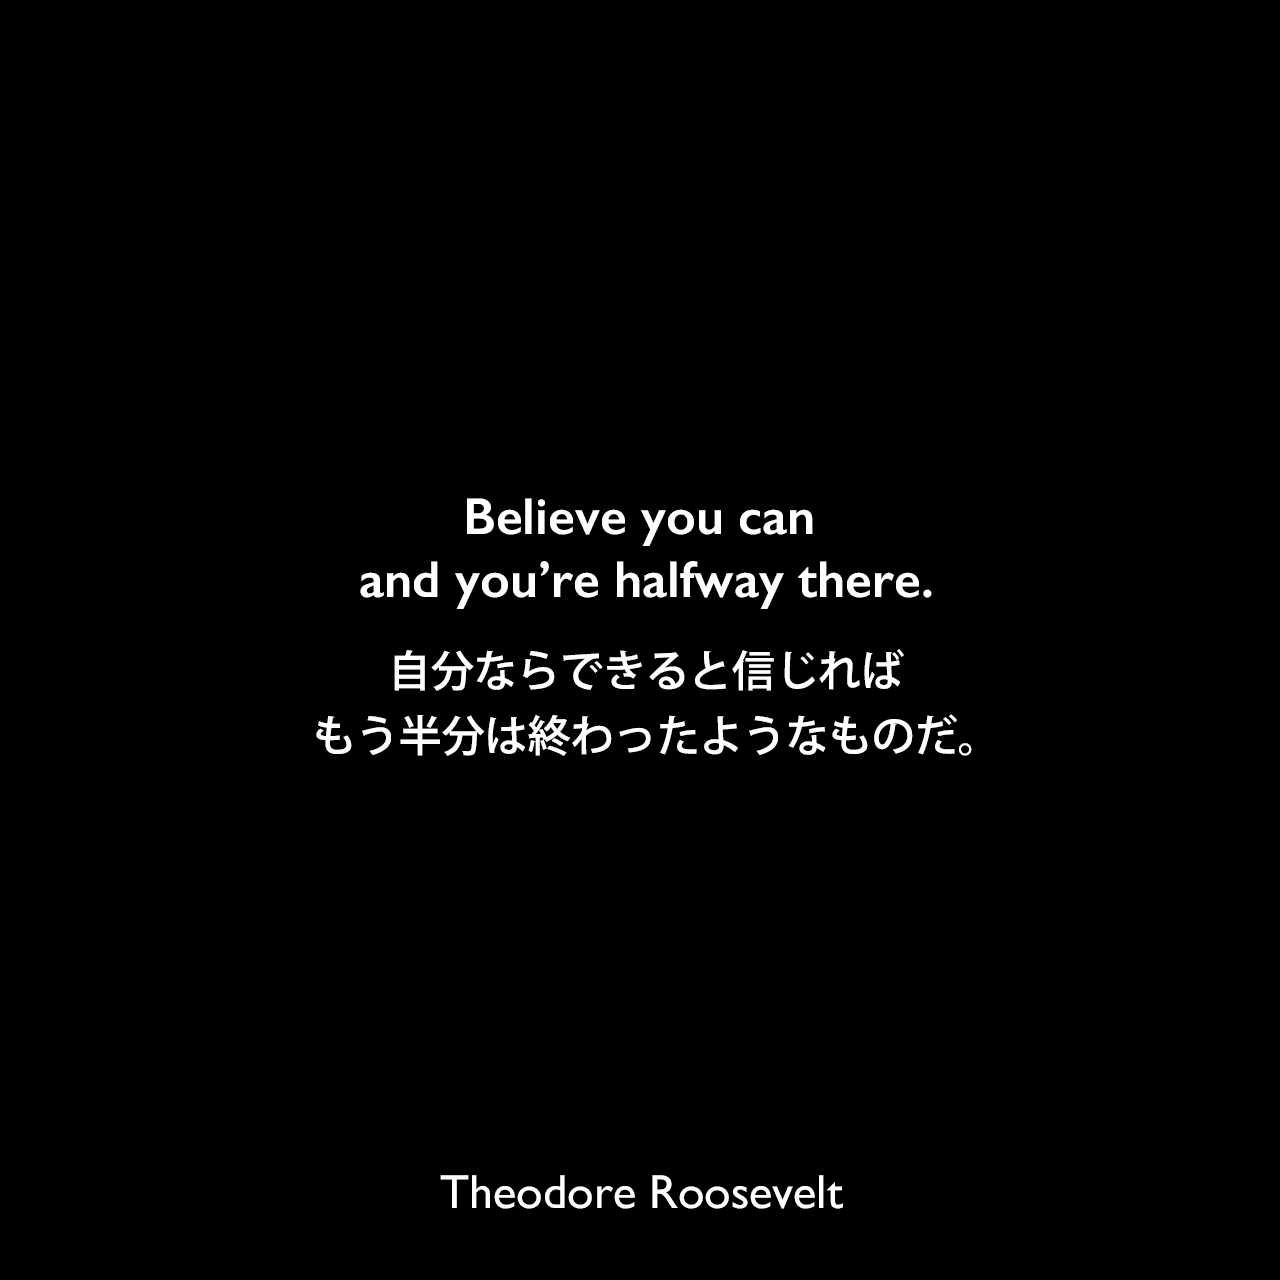 Believe you can and you’re halfway there.自分ならできると信じれば、もう半分は終わったようなものだ。